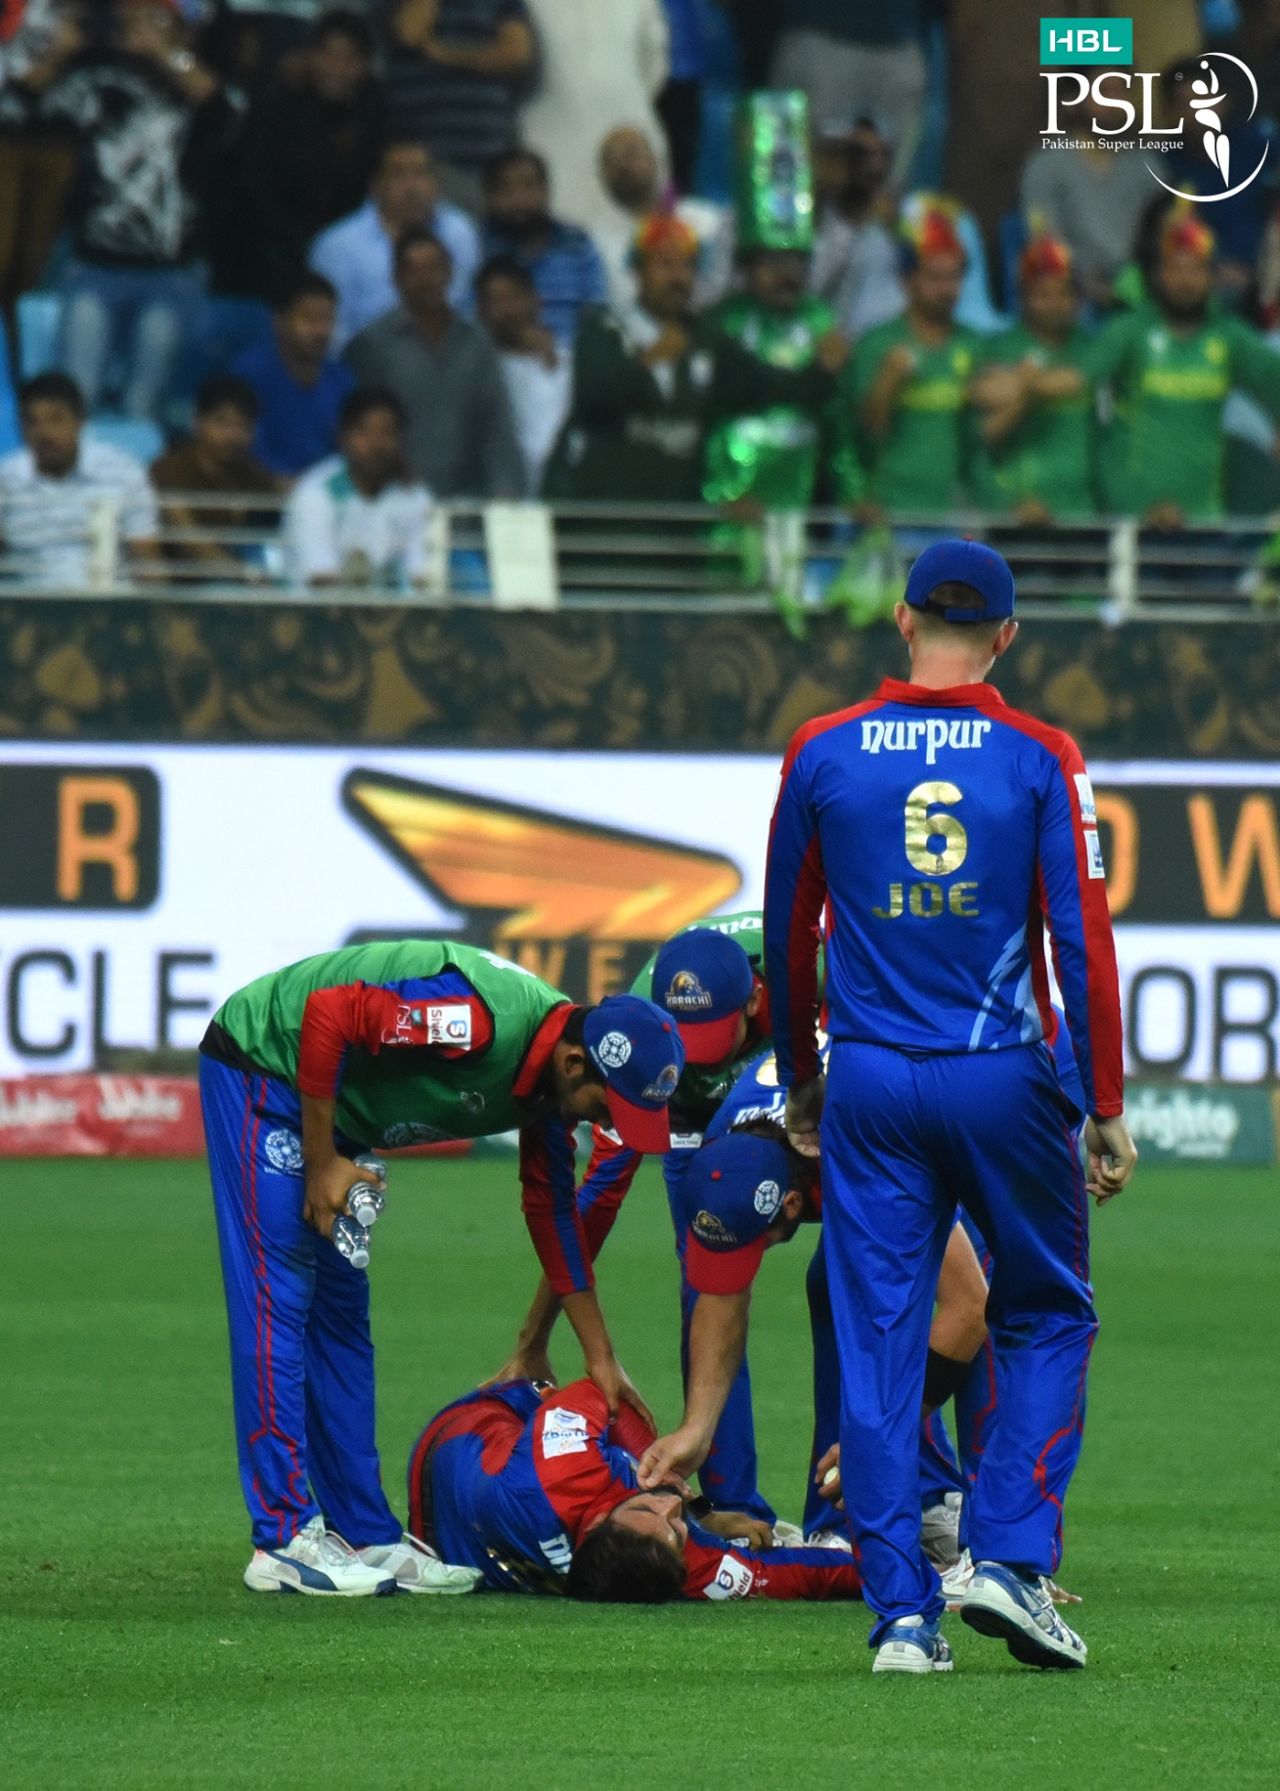 Imad Wasim landed flat on the ground while taking a catch, Karachi Kings v Lahore Qalandars, PSL 2018, March 11, 2018